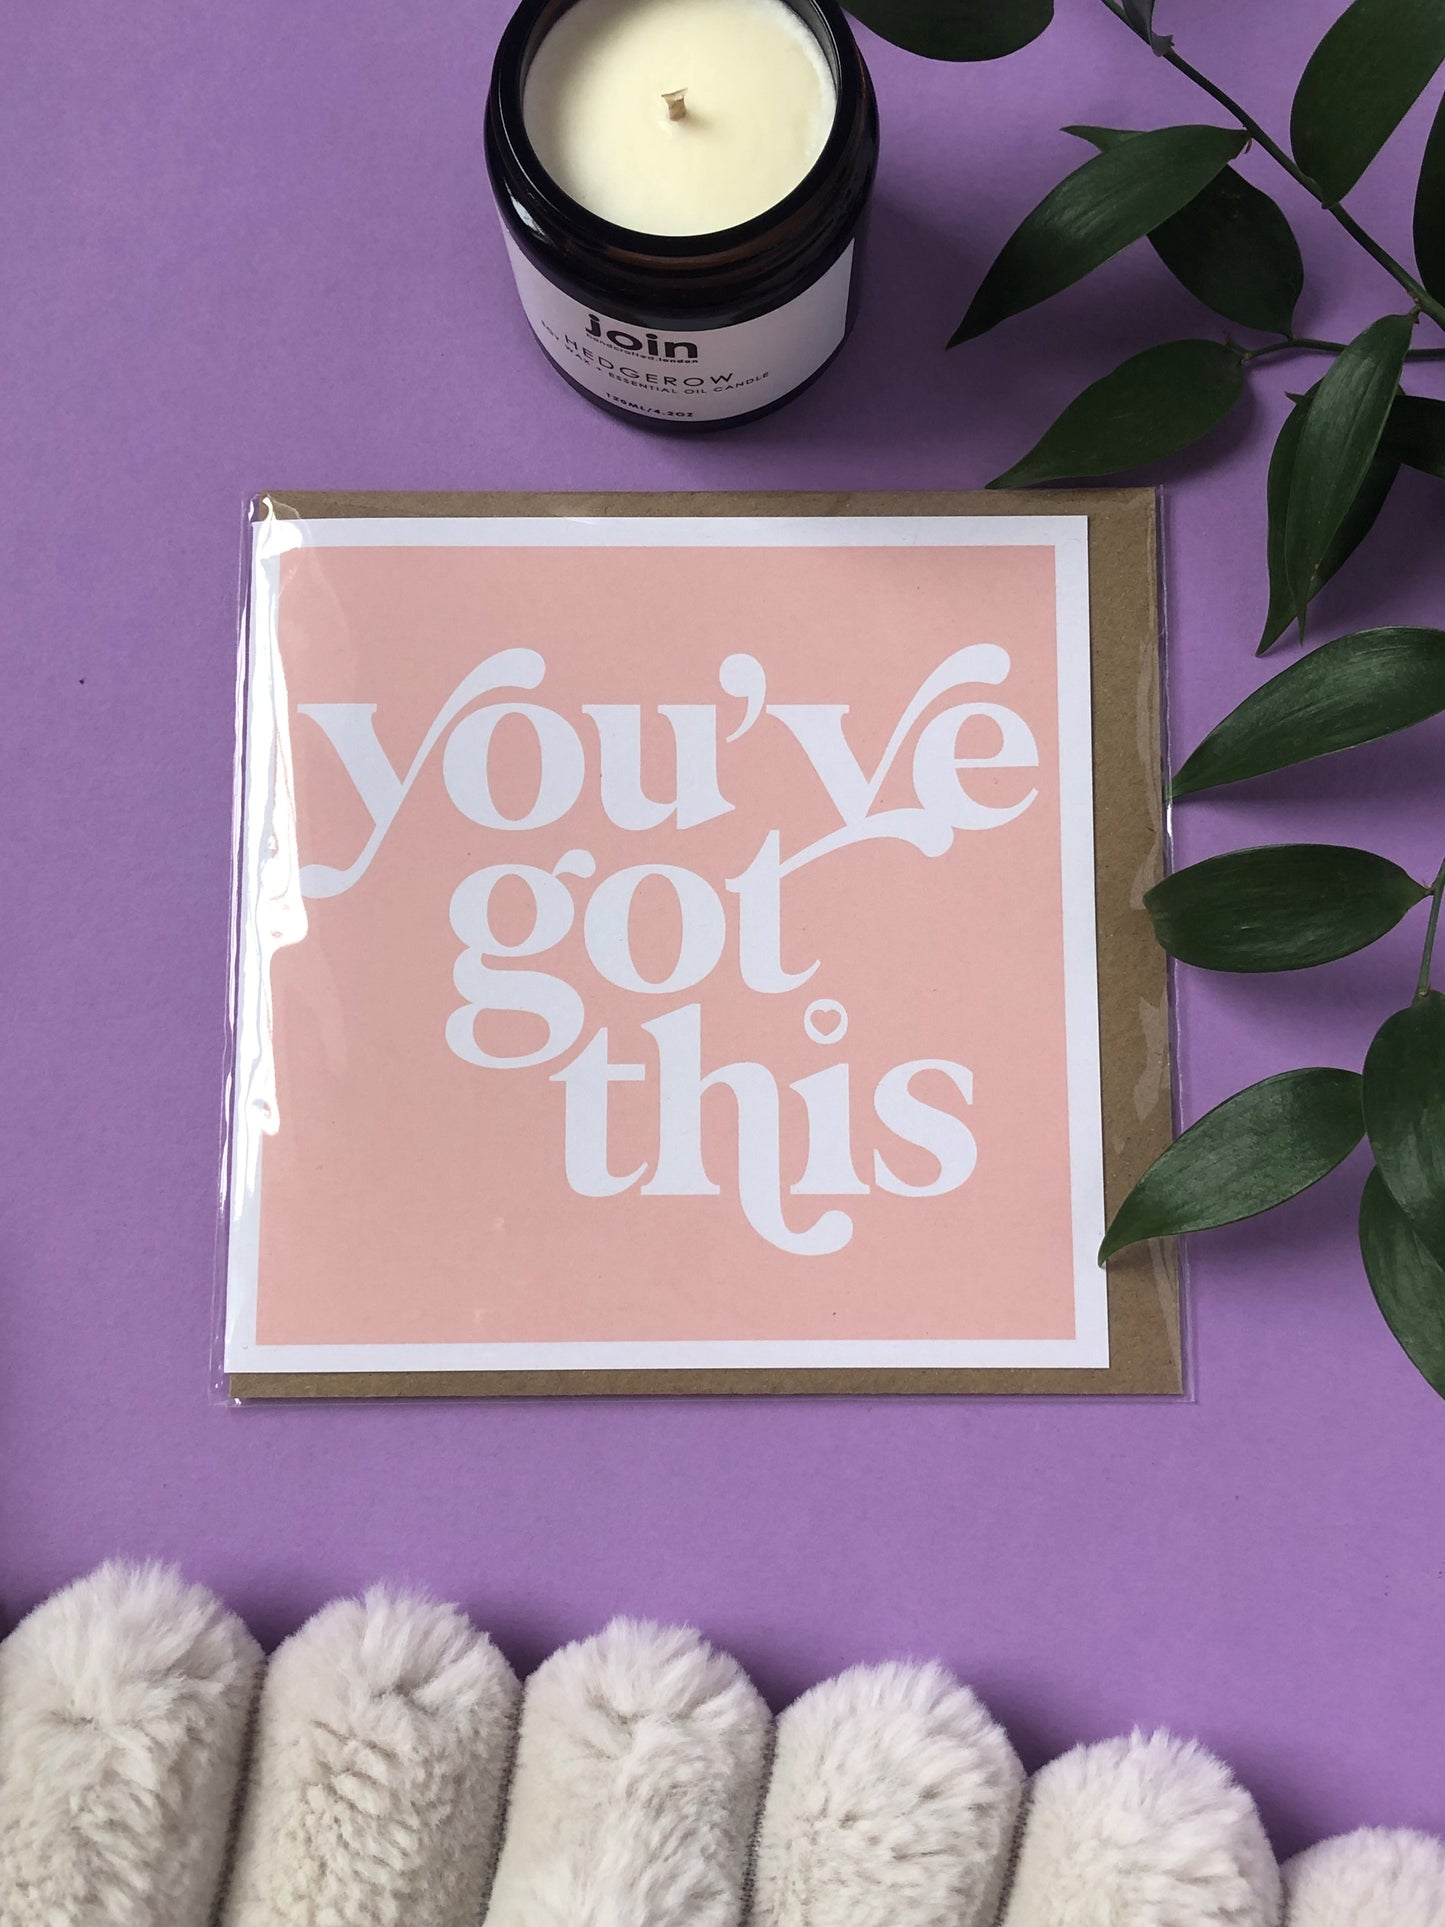 You've got this - Positivity Greeting Card